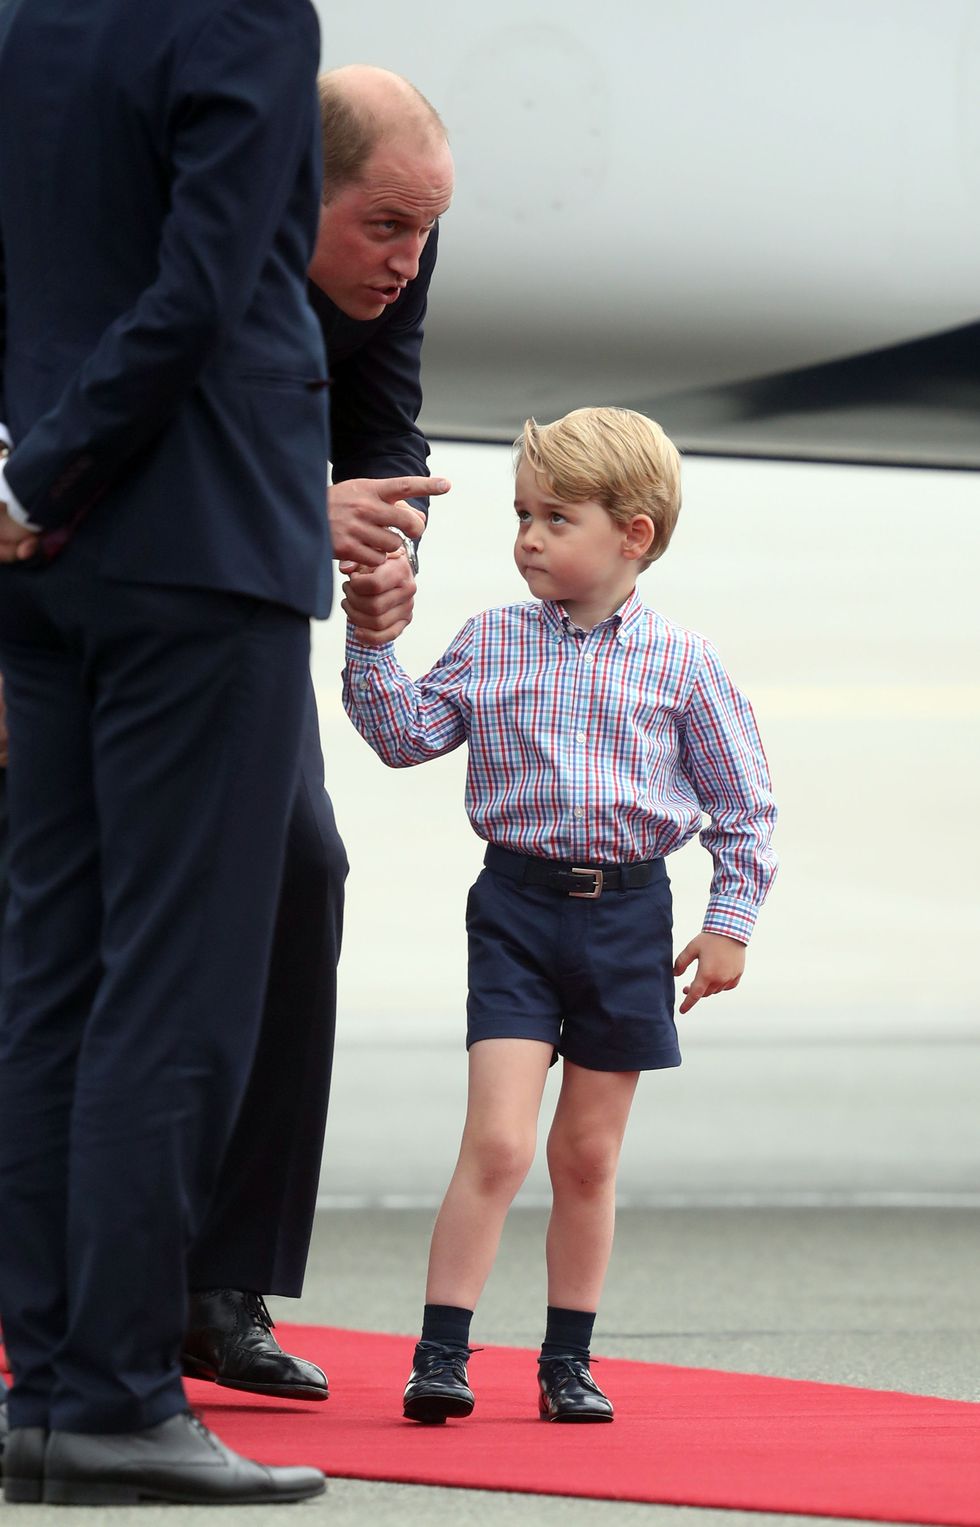 The Duke of Cambridge at Warsaw's Chopin Airport with Prince George at the start of their five-day tour of Poland and Germany.